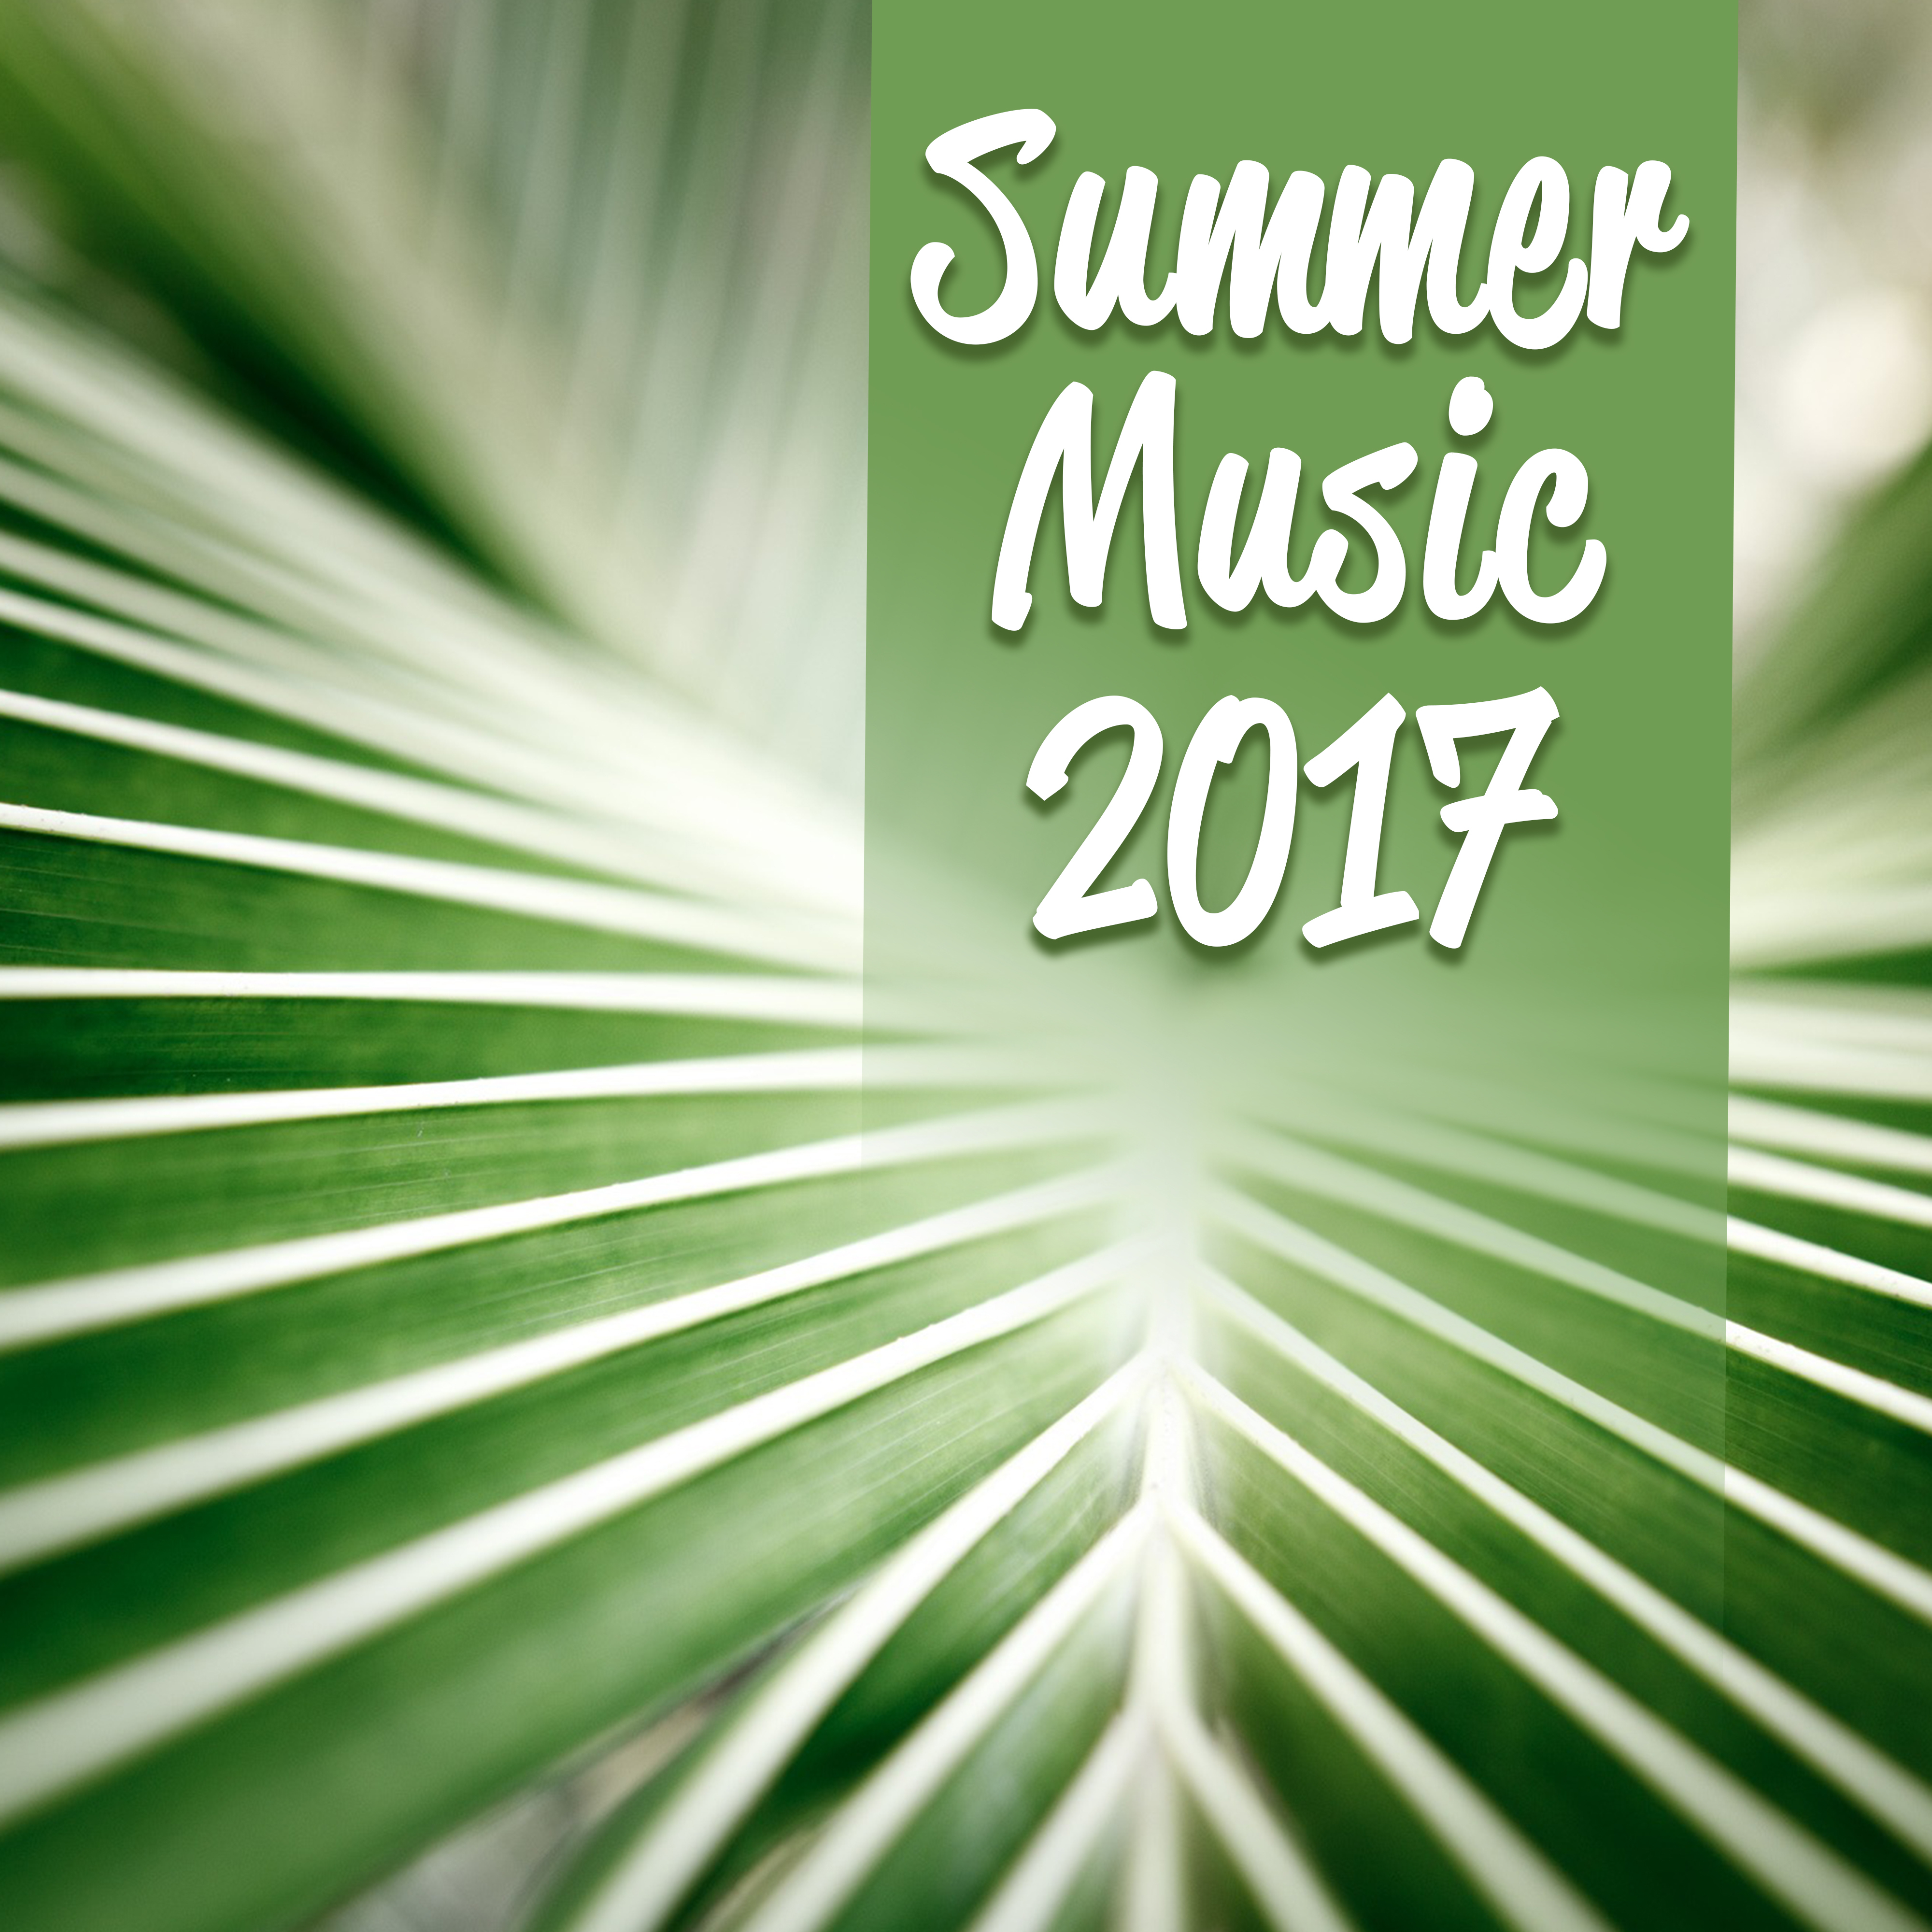 Summer Music 2017 – Dance Party, Drink Bar, Beach Chill, Ibiza Lounge, **** Chill, Holiday Songs, Deep Relaxation, Party Time